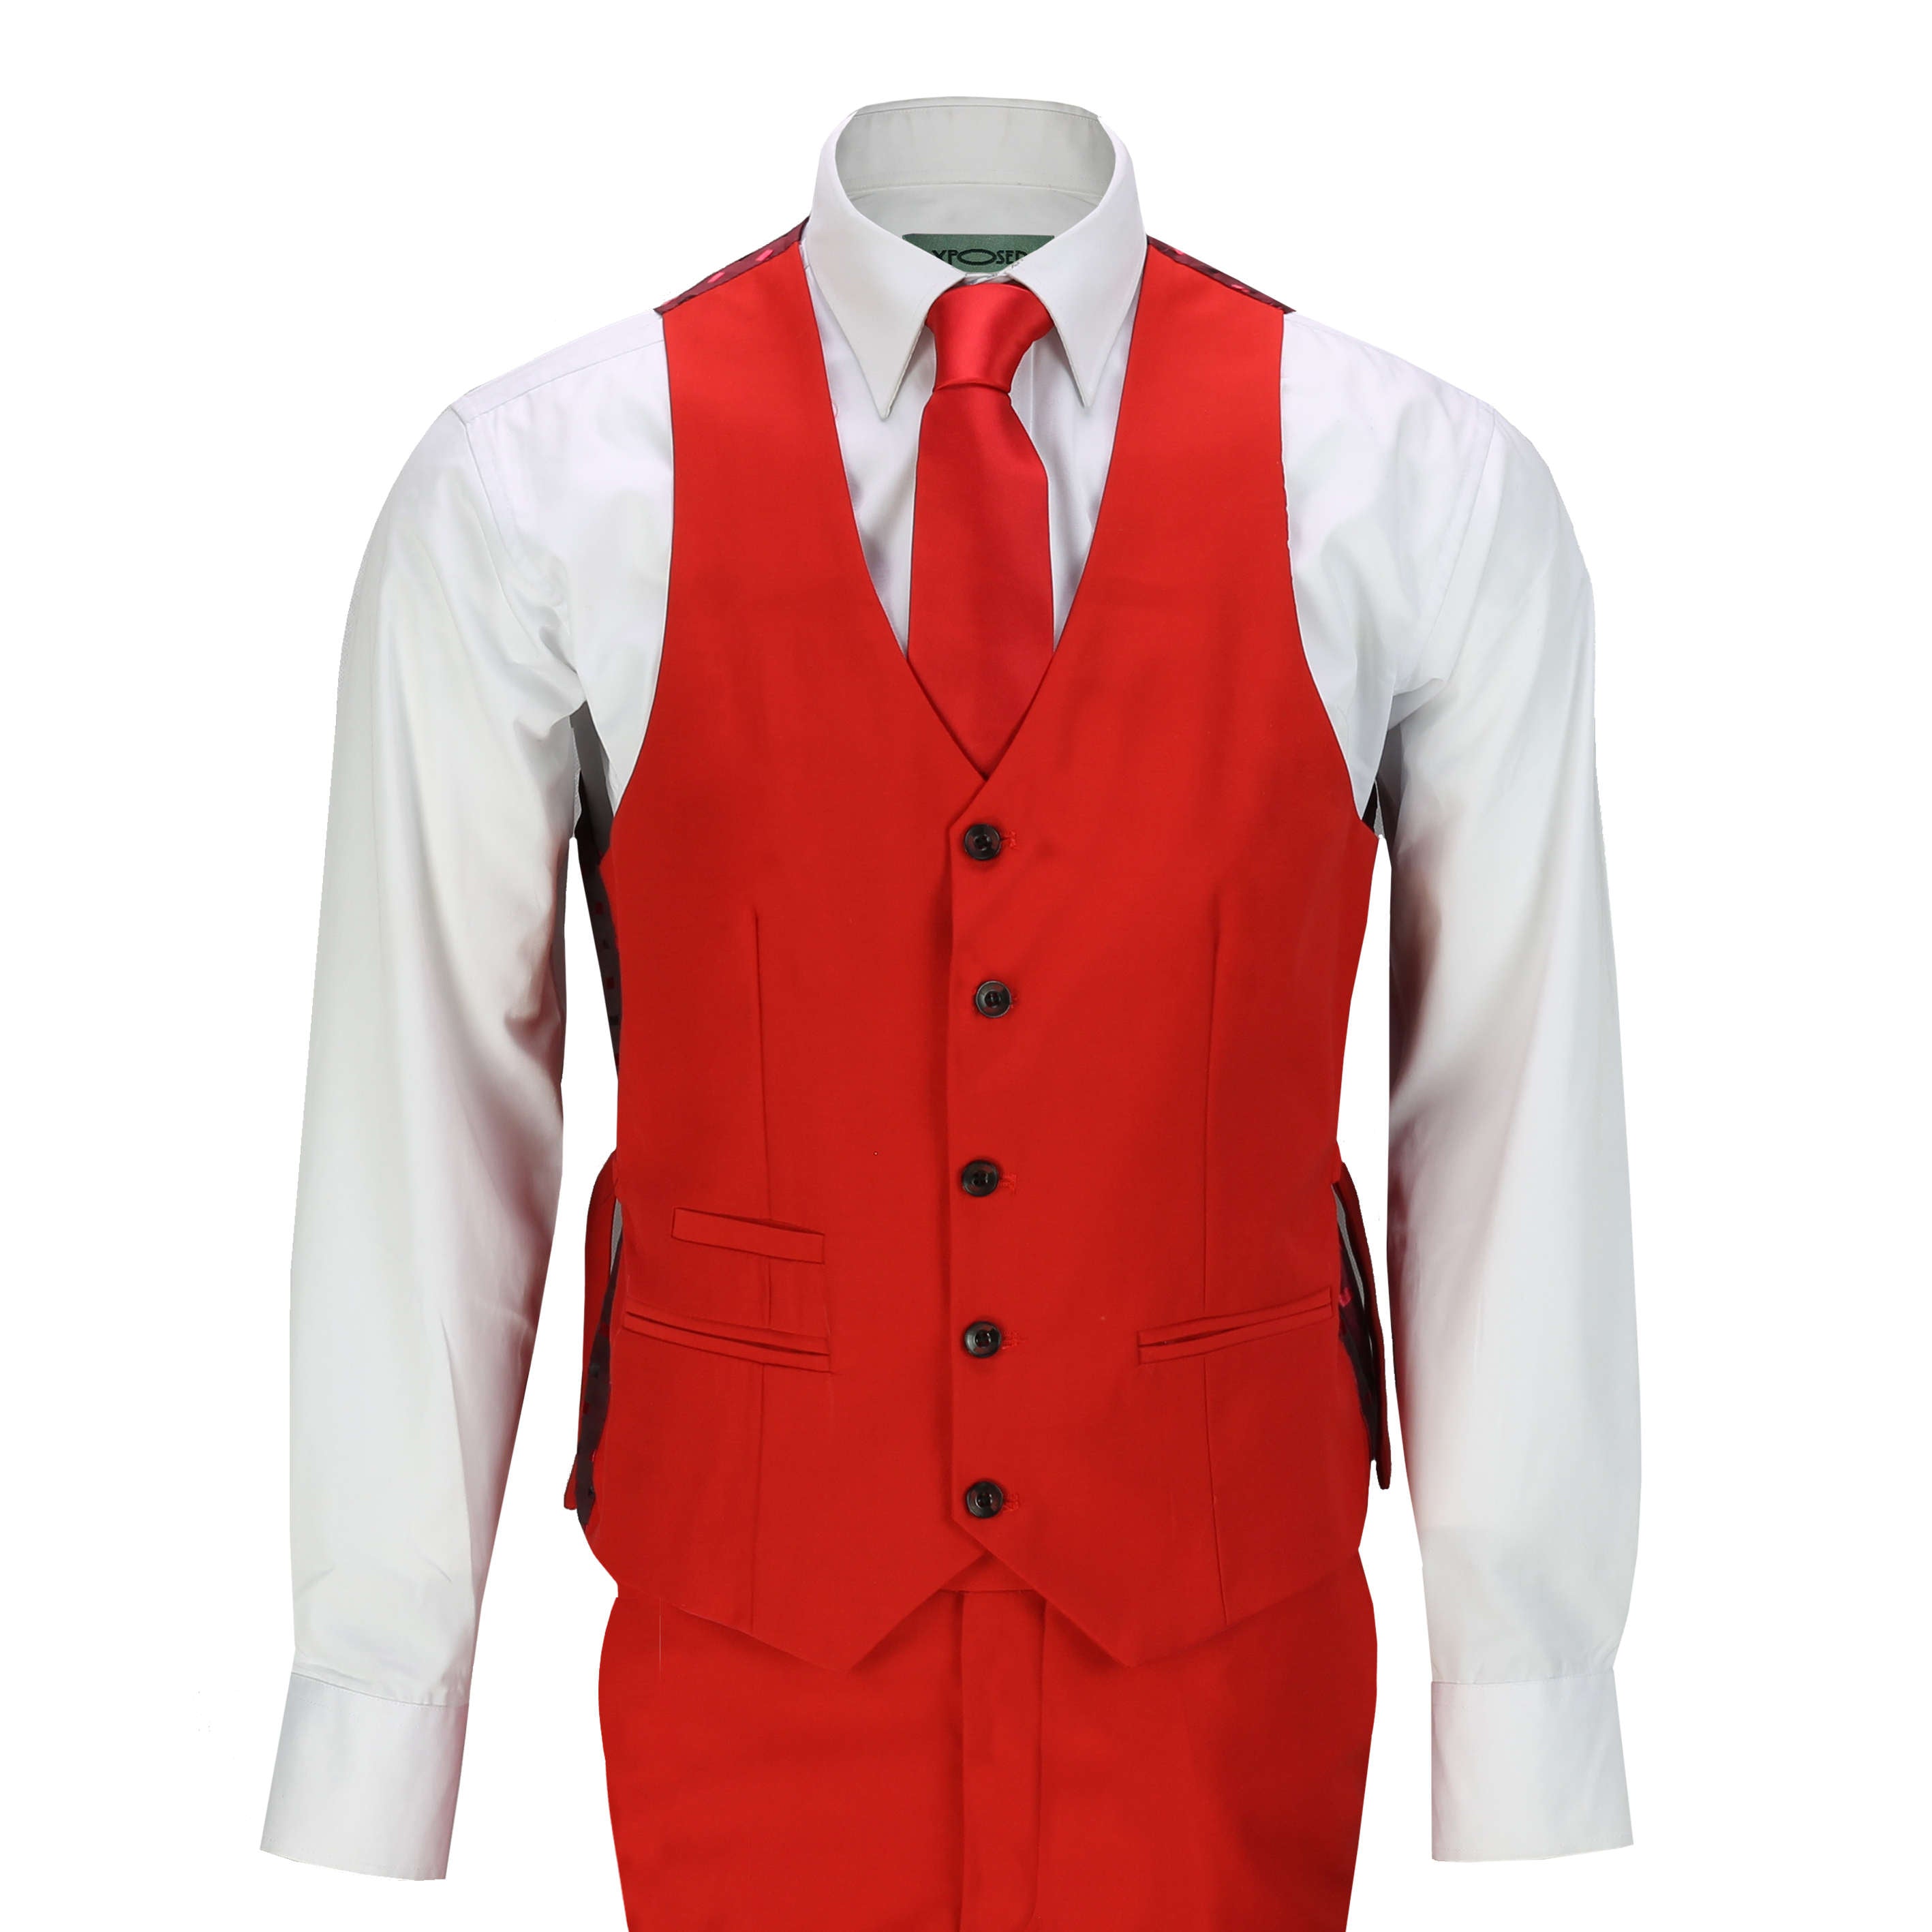 Mens 3 Piece Suit In Red Smart Formal Wedding Party Retro Tailored Fit Jacket